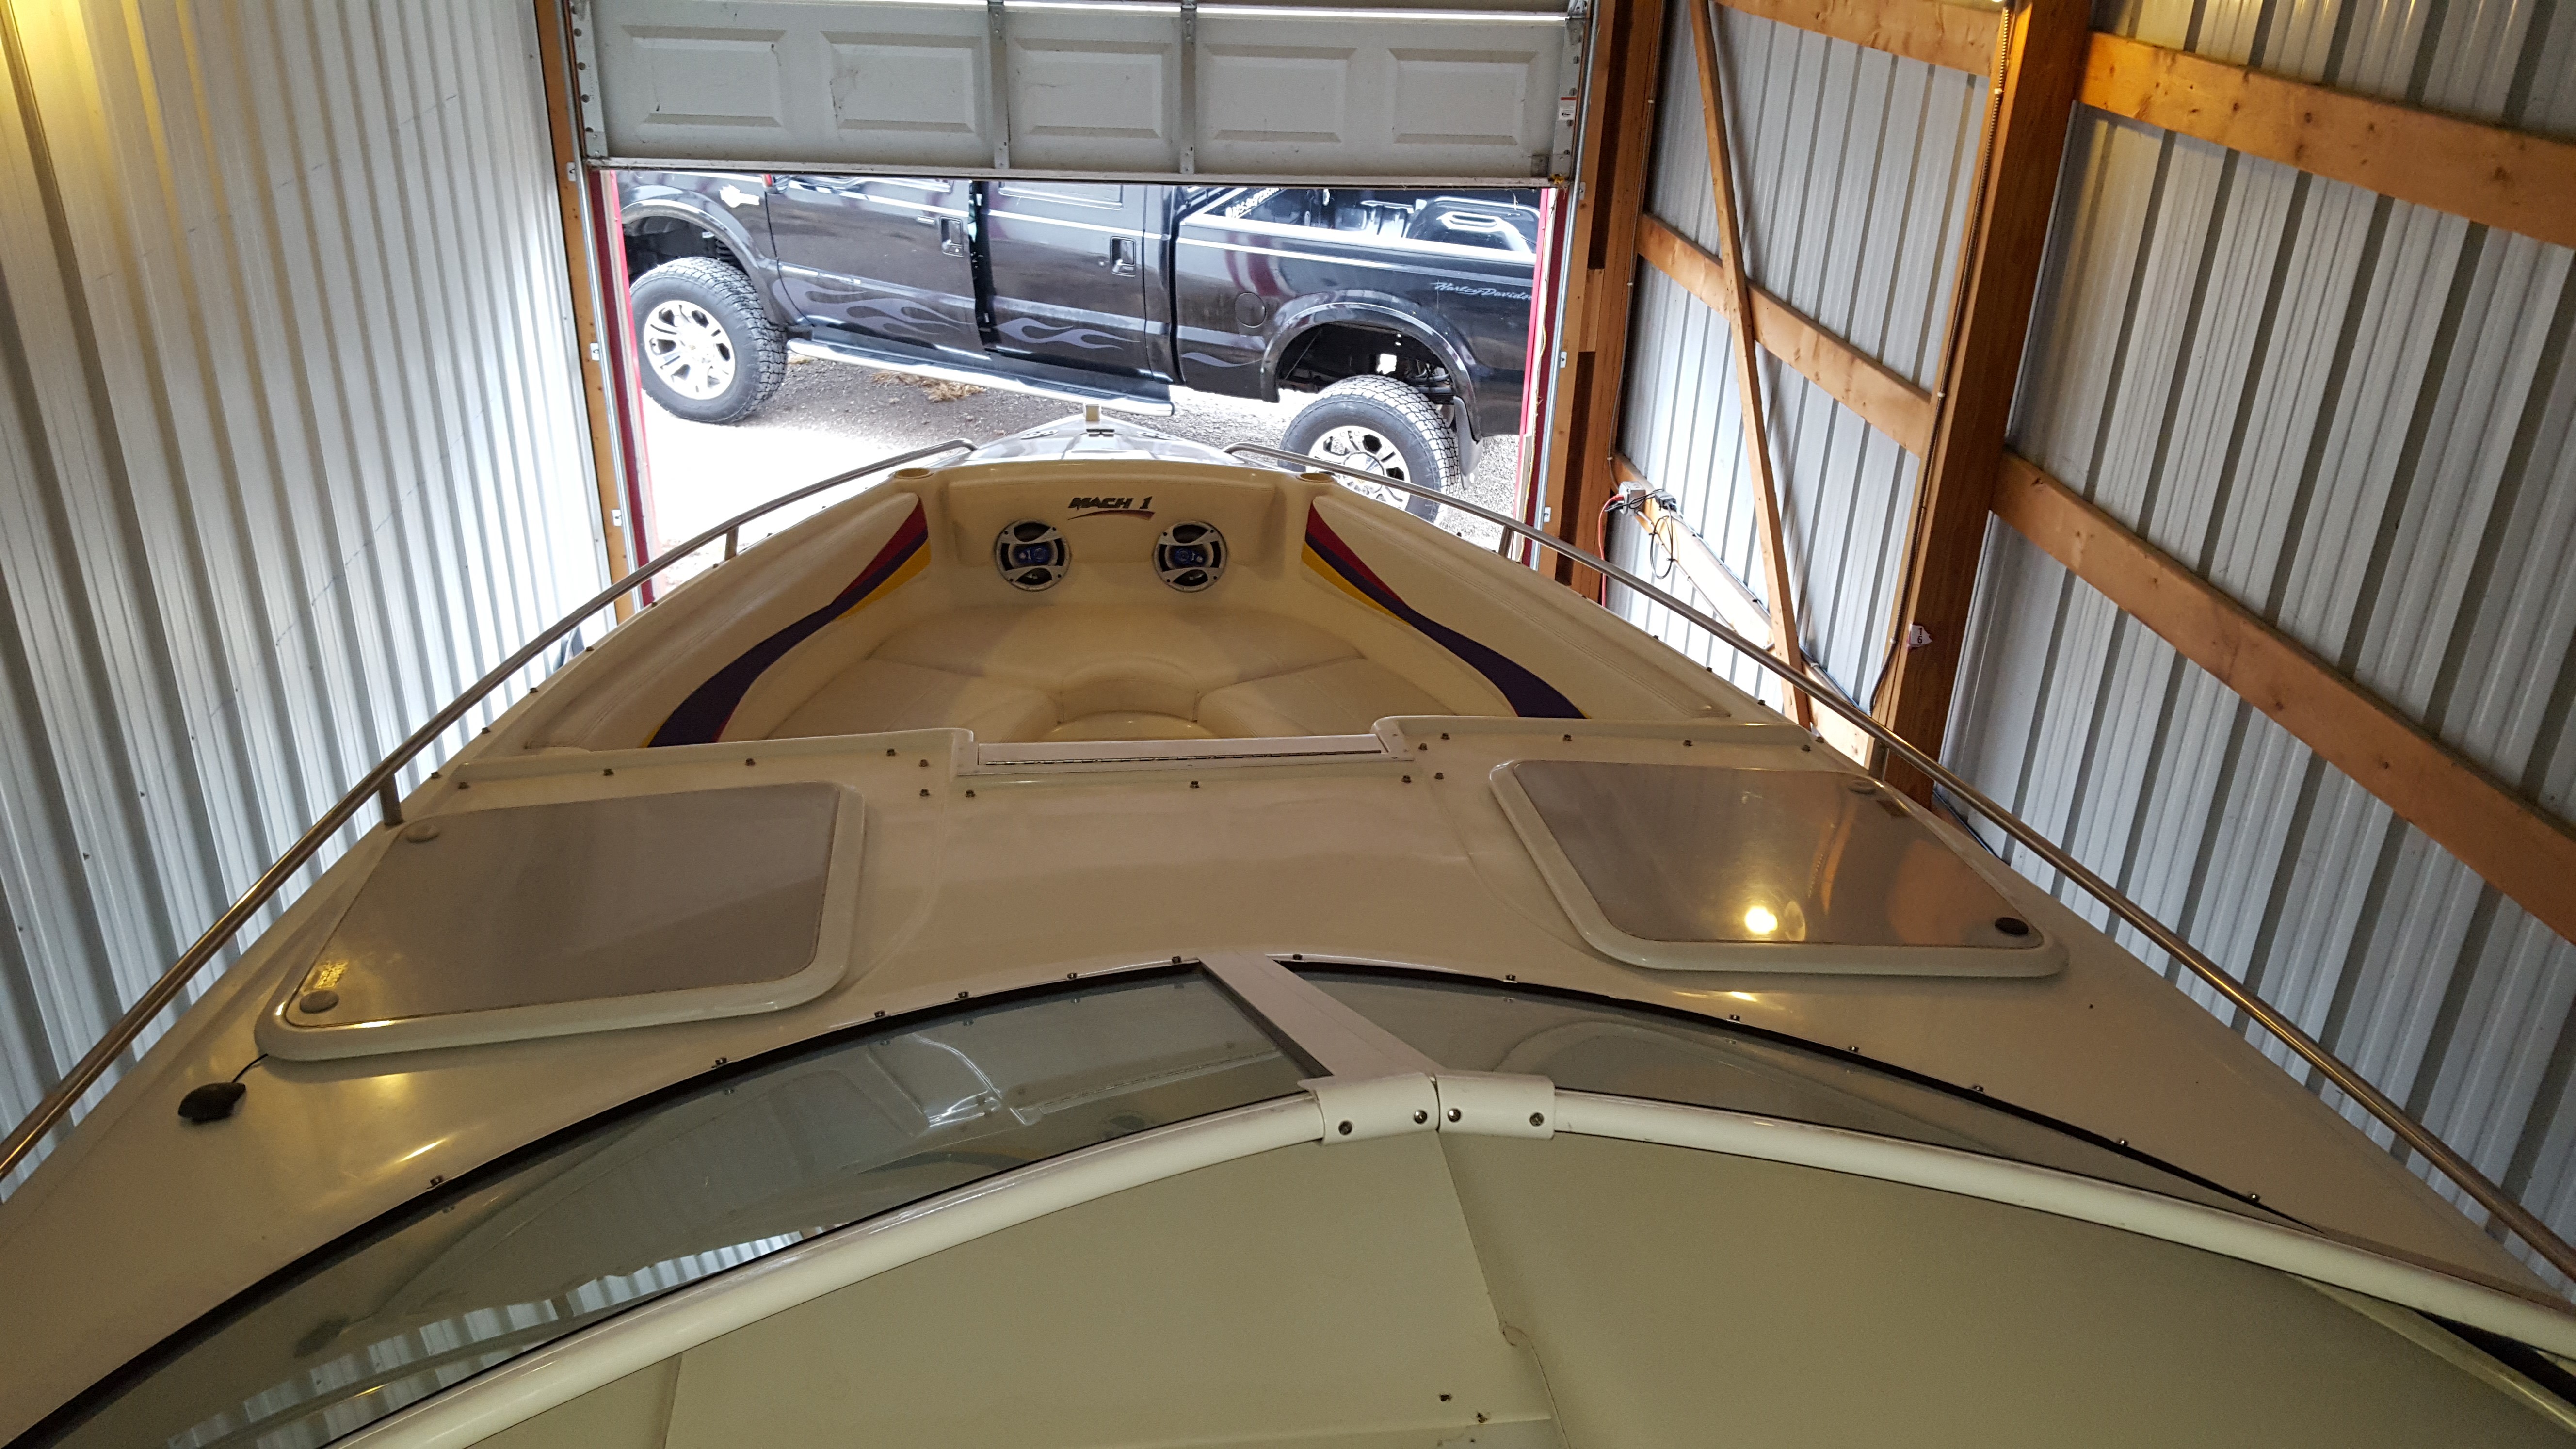 2000 Baja Mach 1 Power boat for sale in Purdy, MO - image 19 